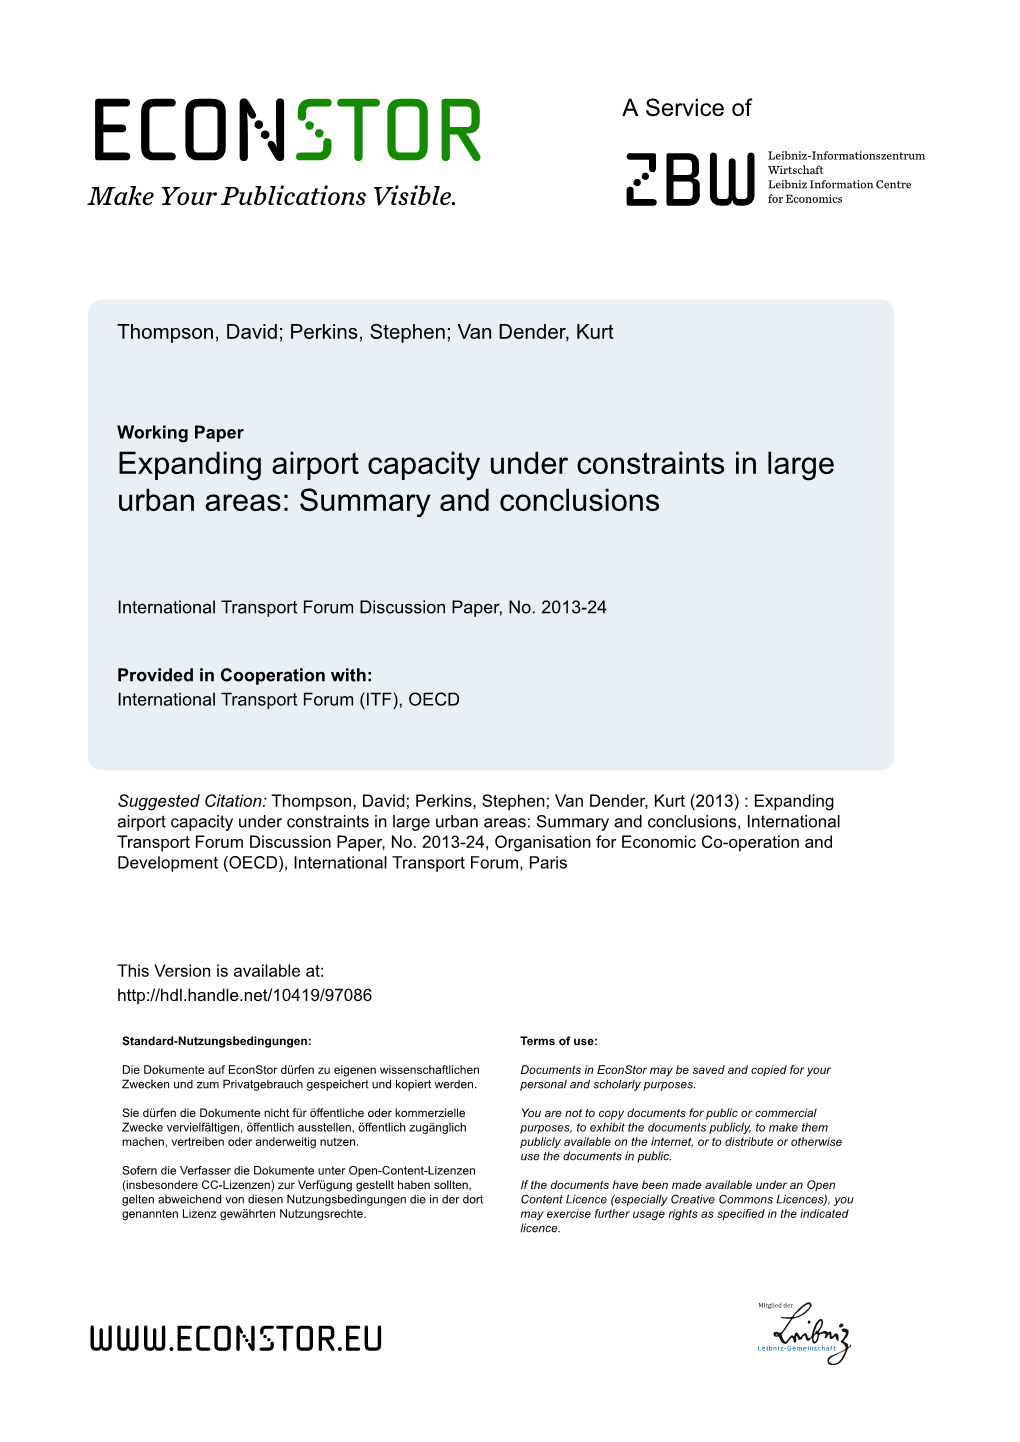 Expanding Airport Capacity Under Constraints in Large Urban Areas: Summary and Conclusions